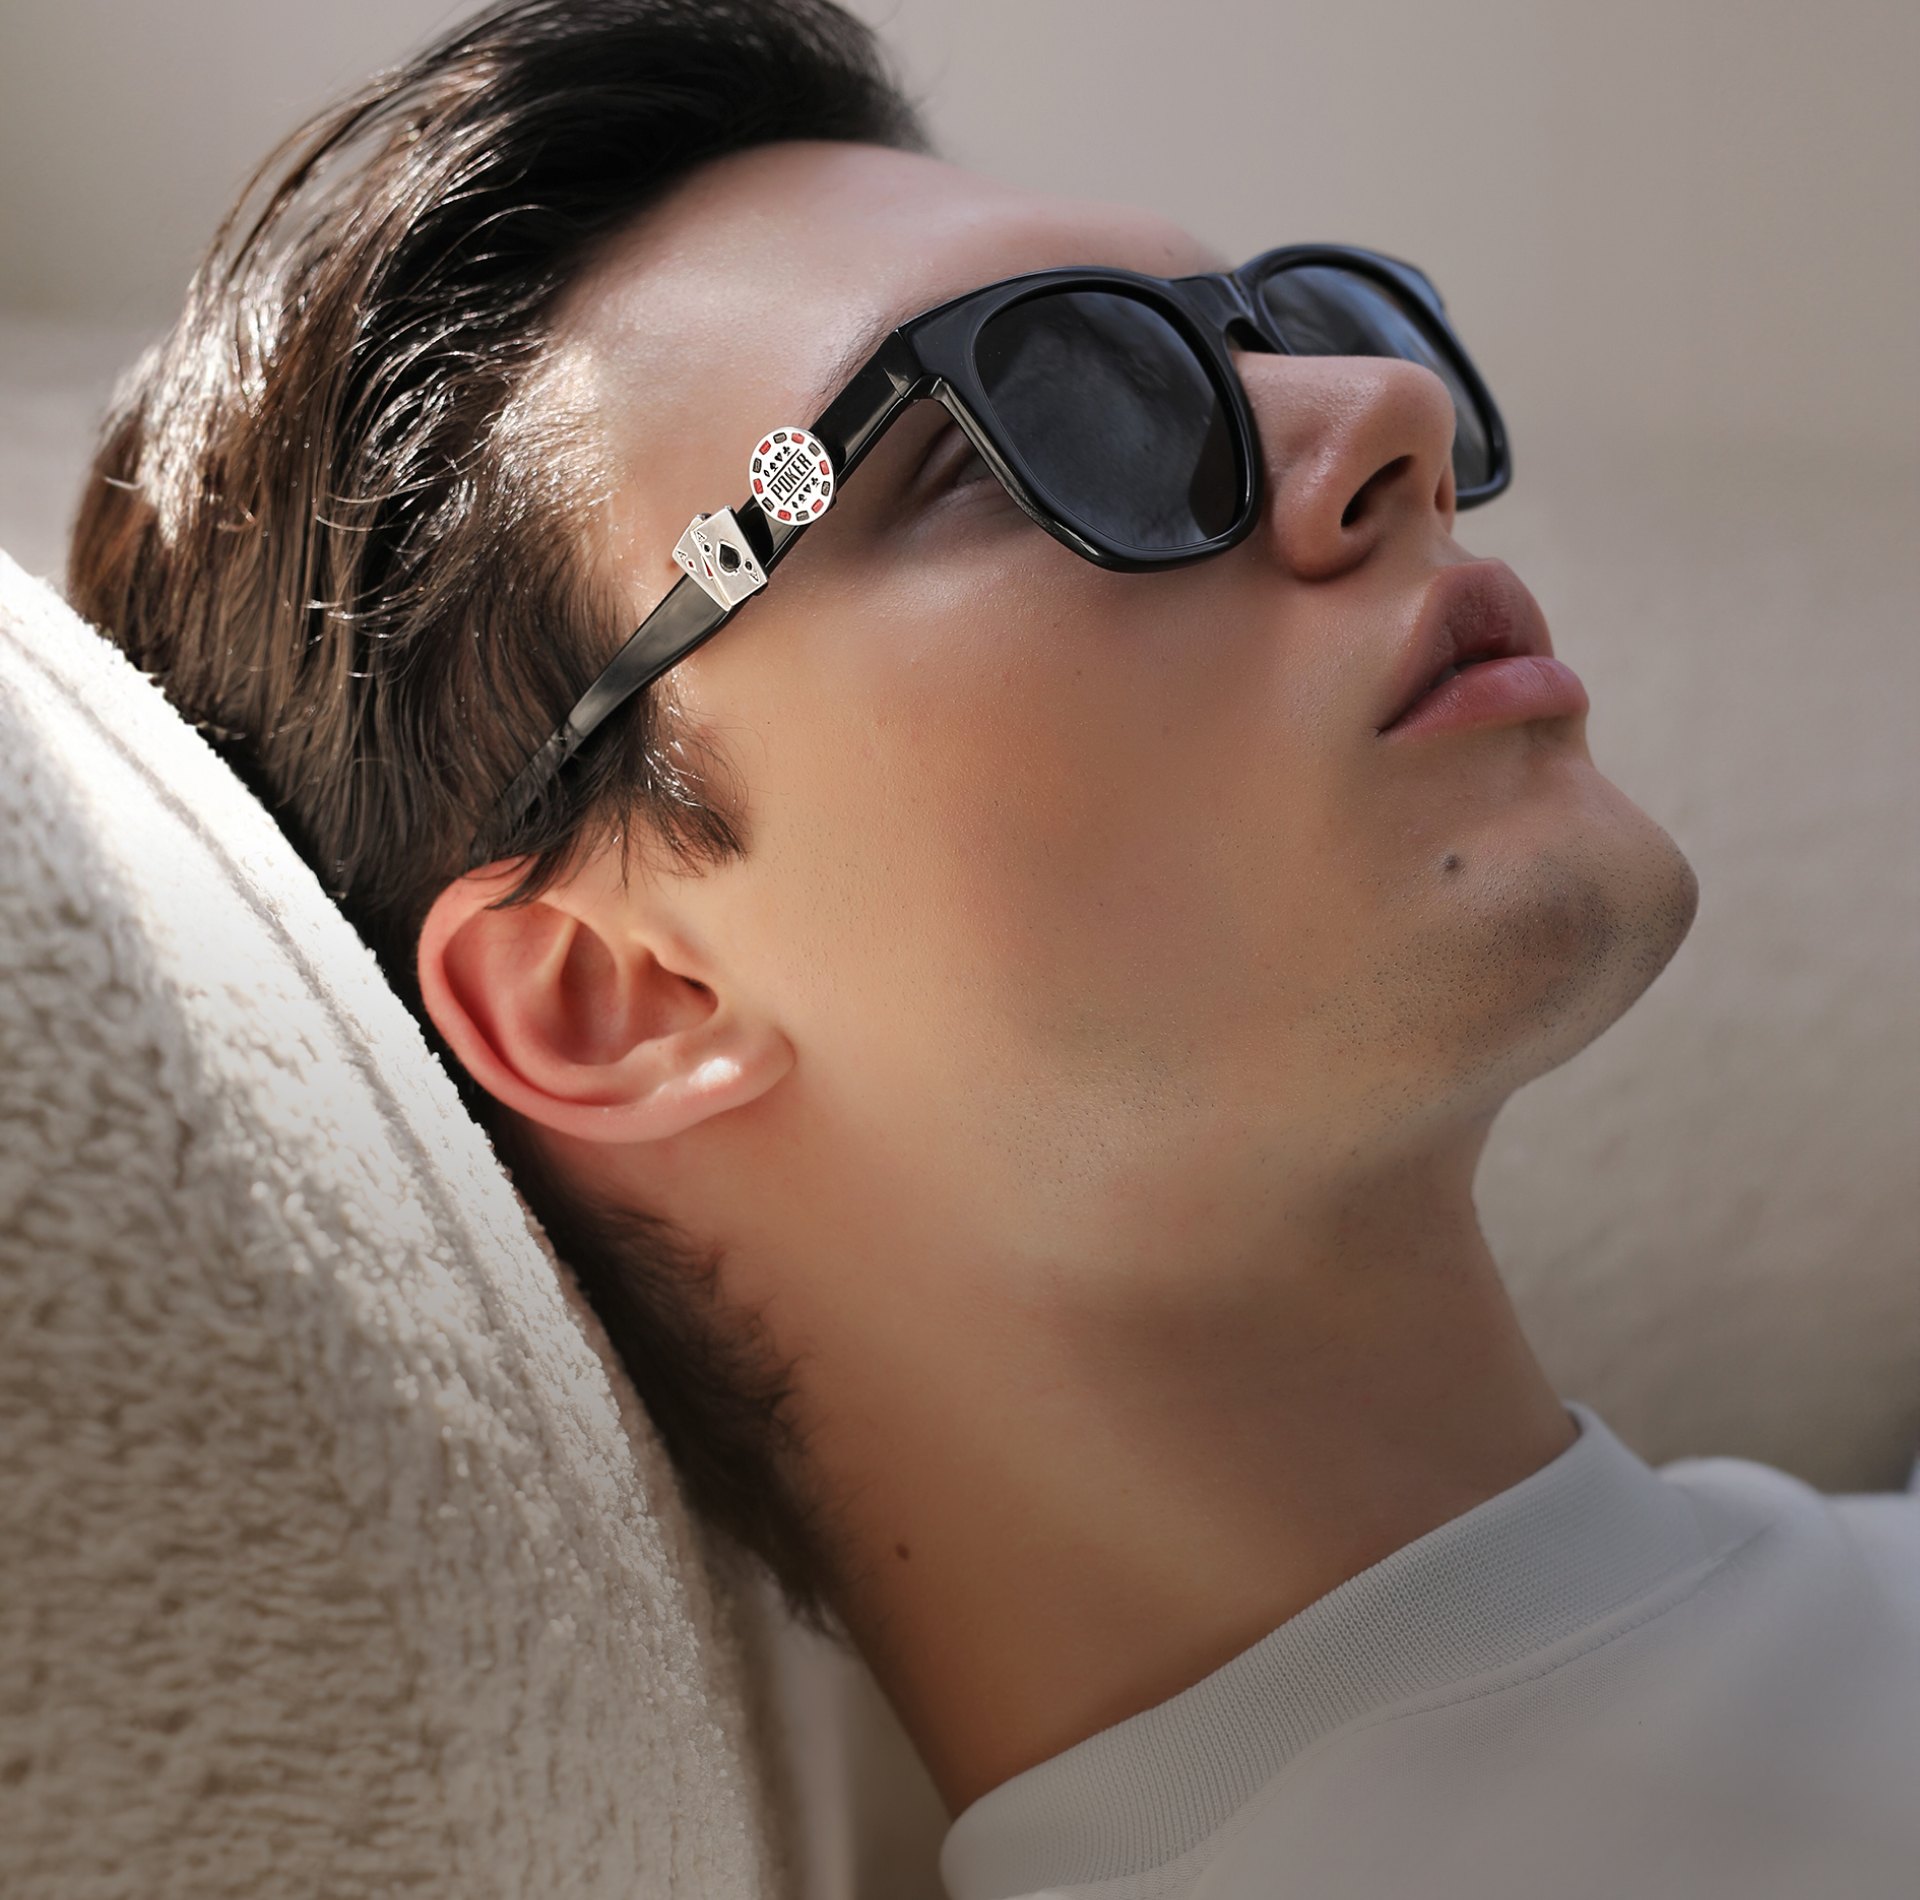 Sophisticated Statements: Men's Eyewear Charms